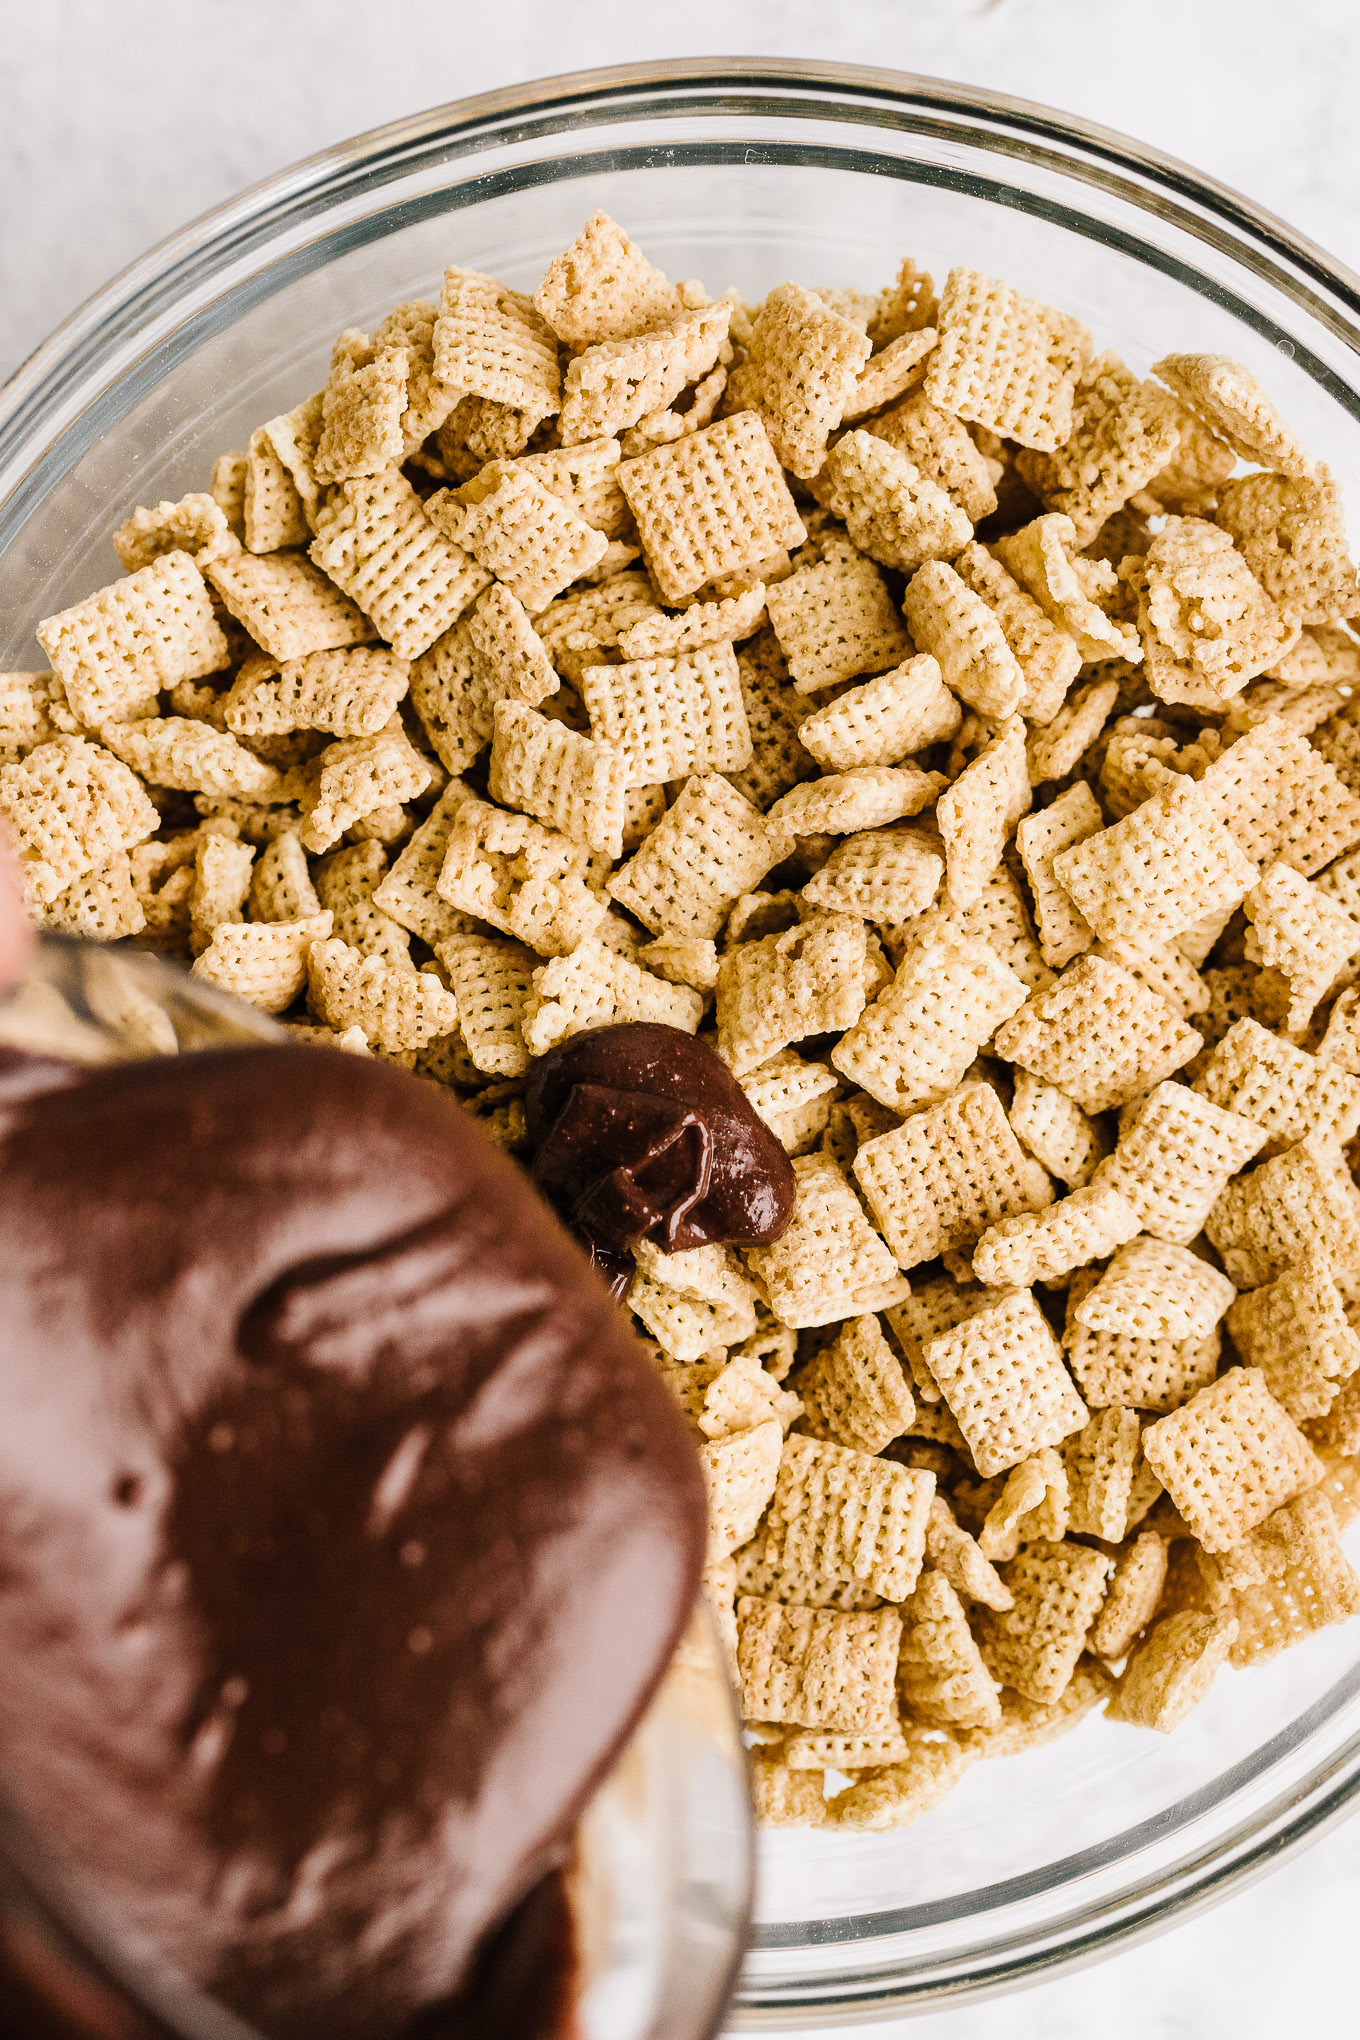 chocolate-peanut butter mixture pouring onto Chex cereal